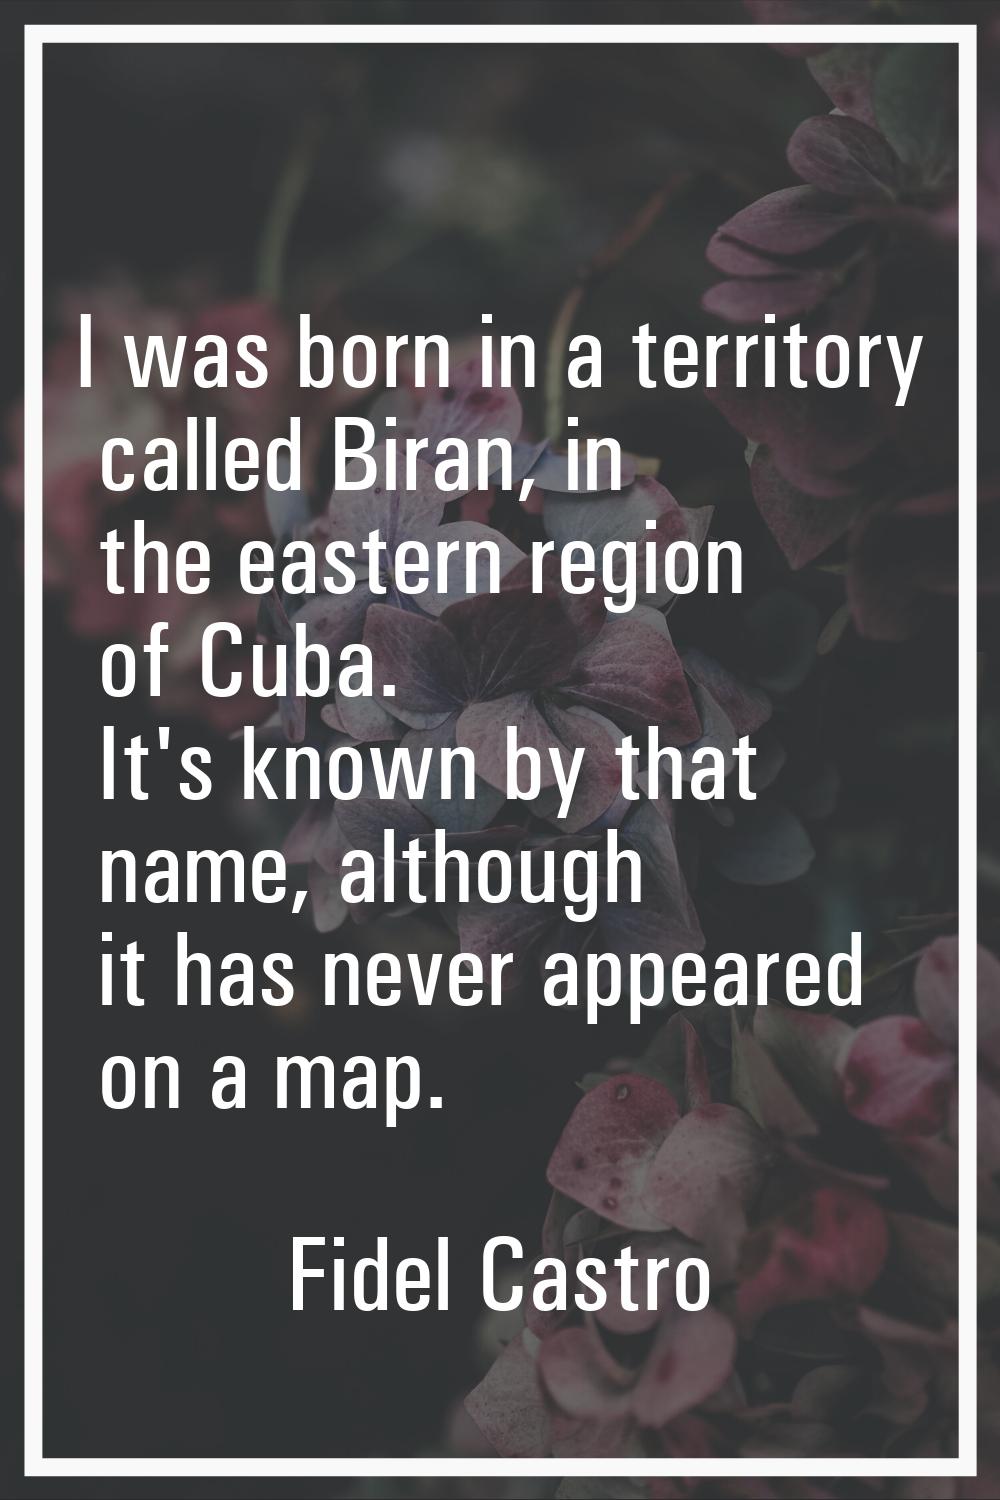 I was born in a territory called Biran, in the eastern region of Cuba. It's known by that name, alt